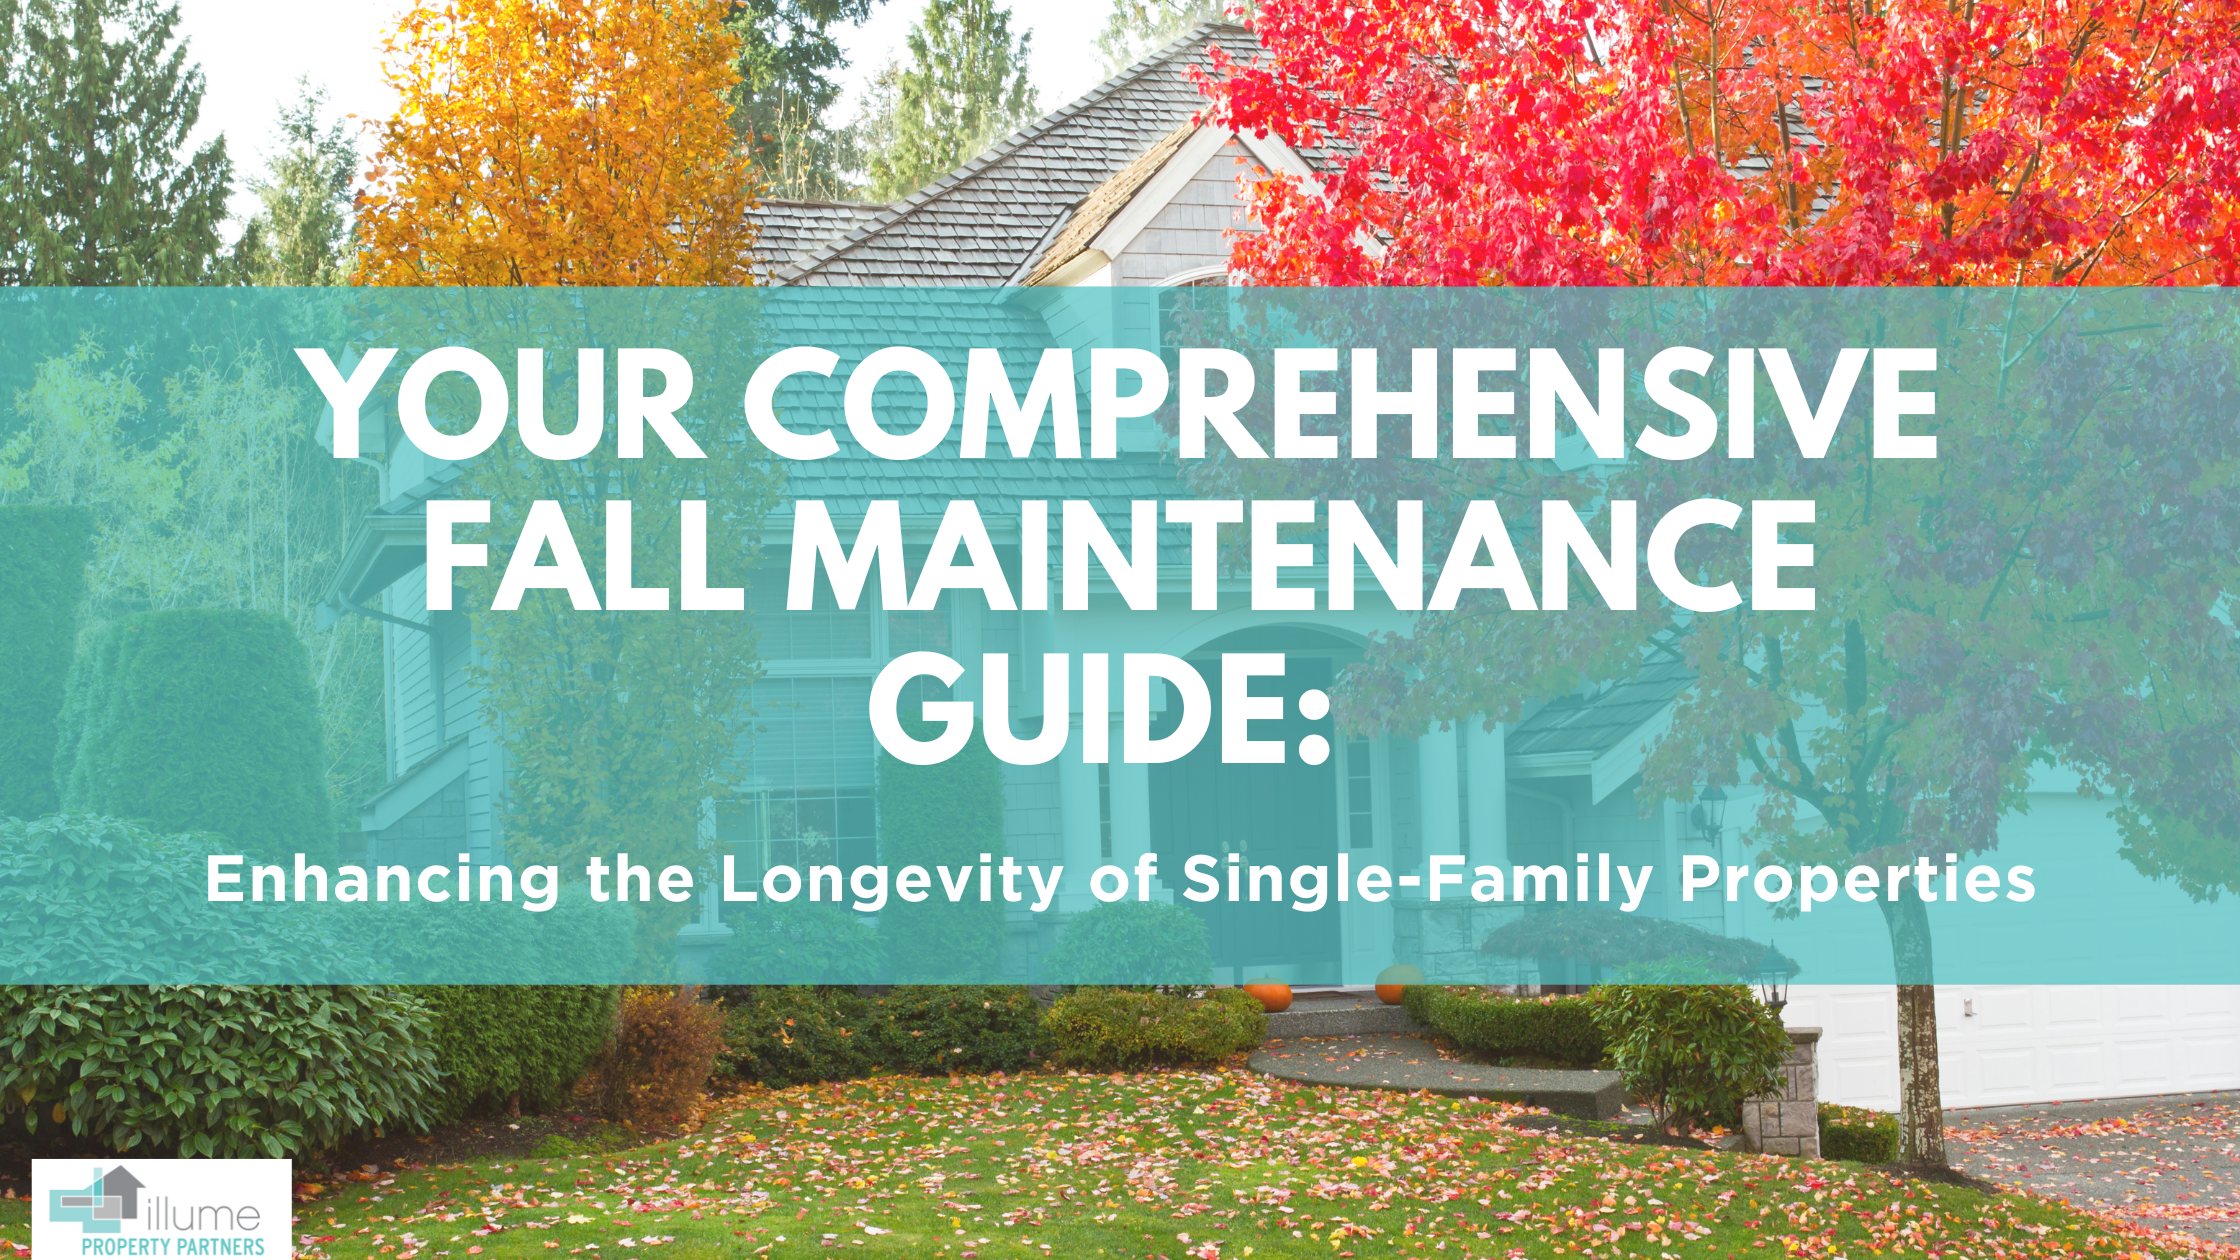 Your Comprehensive Fall Maintenance Guide: Enhancing the Longevity of Single-Family Properties